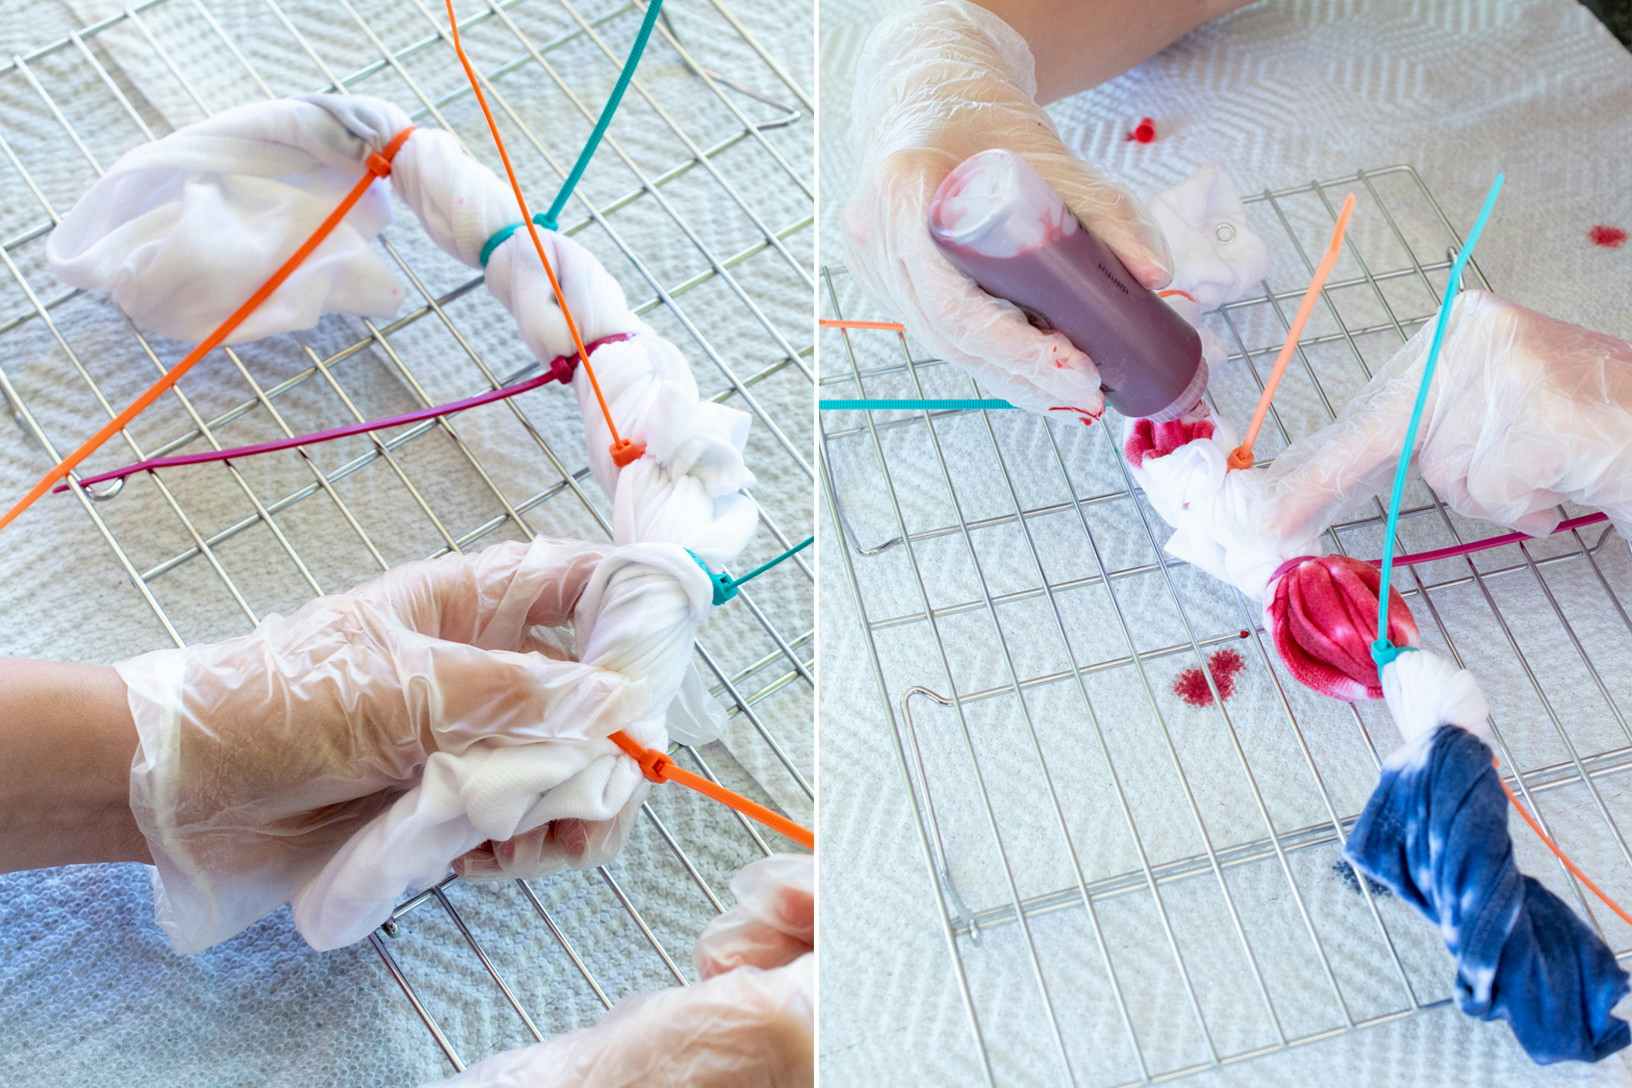 A person's gloved hands fastening zip ties around the rolled up Old Navy baby onsie and applying the different colored dye to each section.